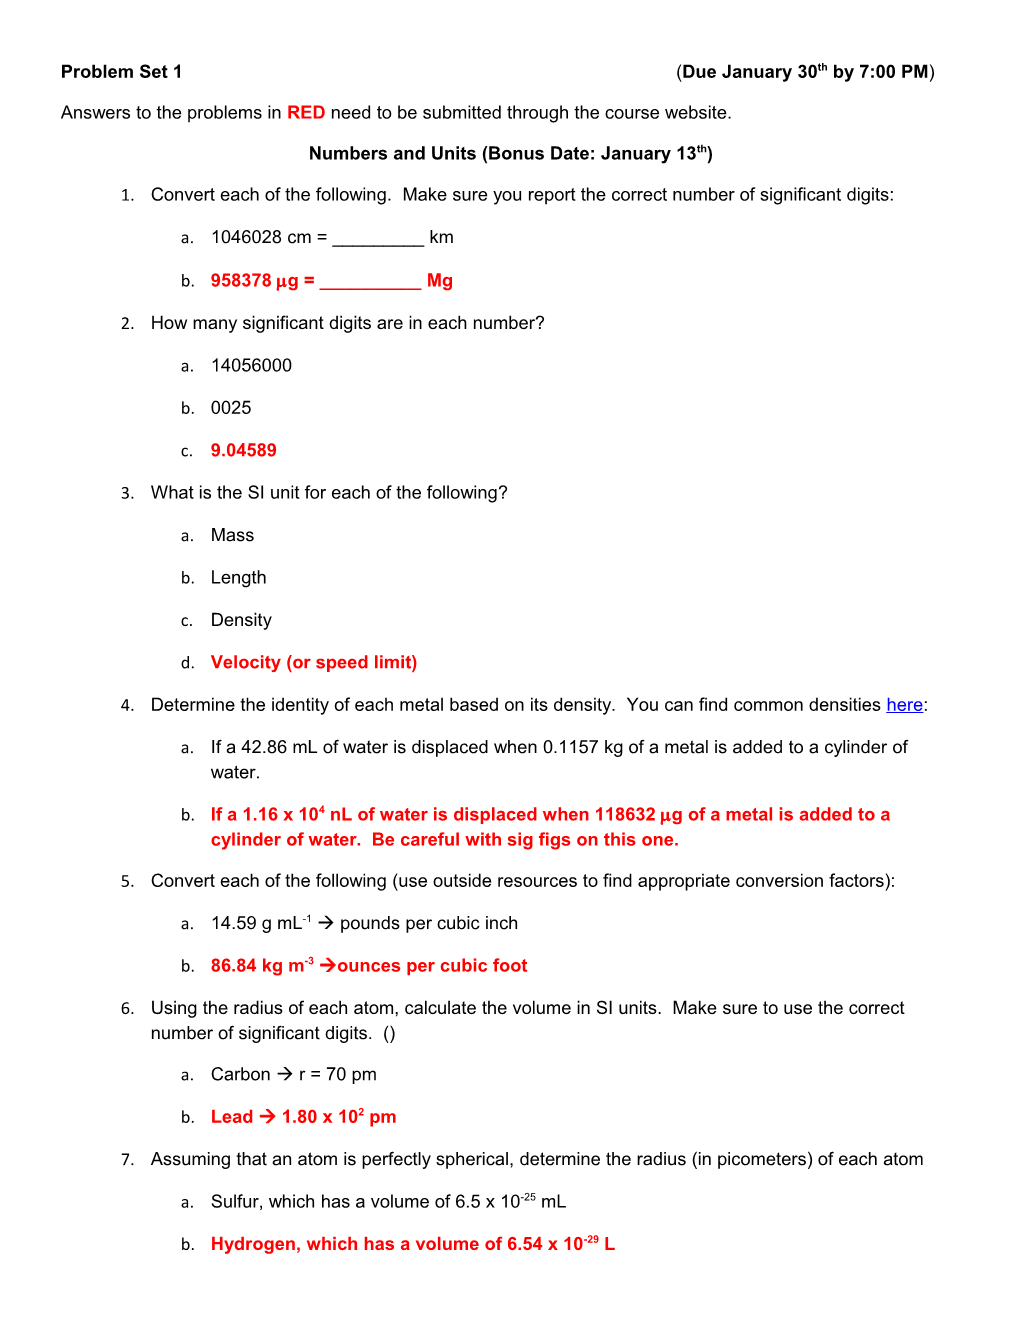 Answers to the Problems in Redneed to Be Submitted Through the Course Website